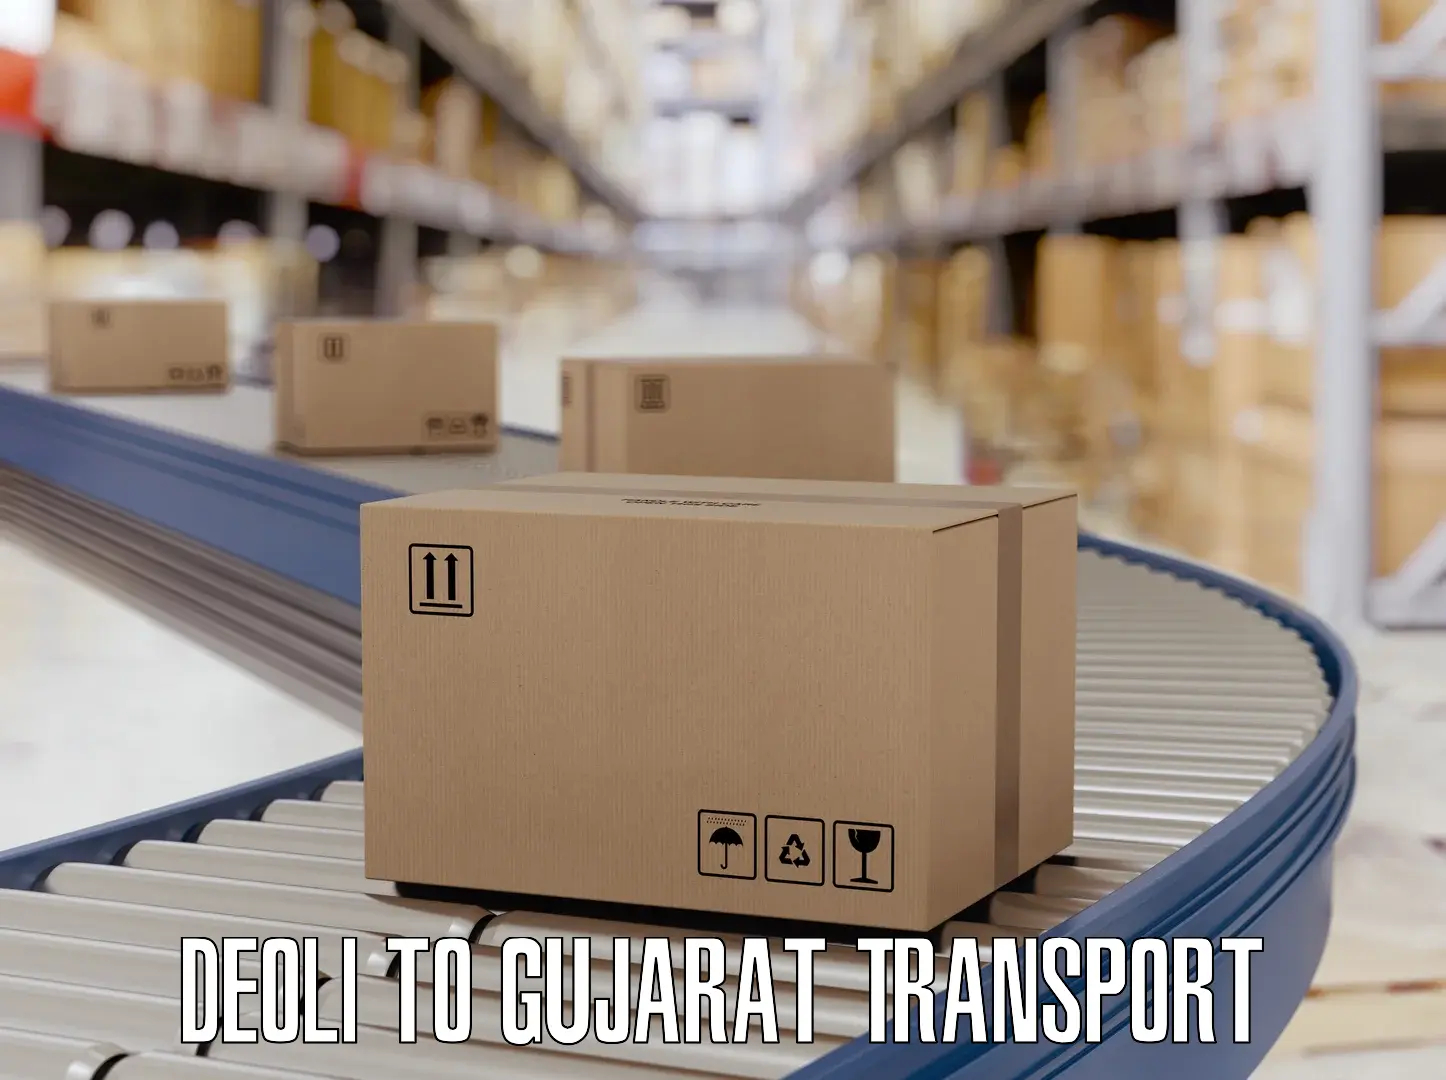 Daily parcel service transport Deoli to Dholera